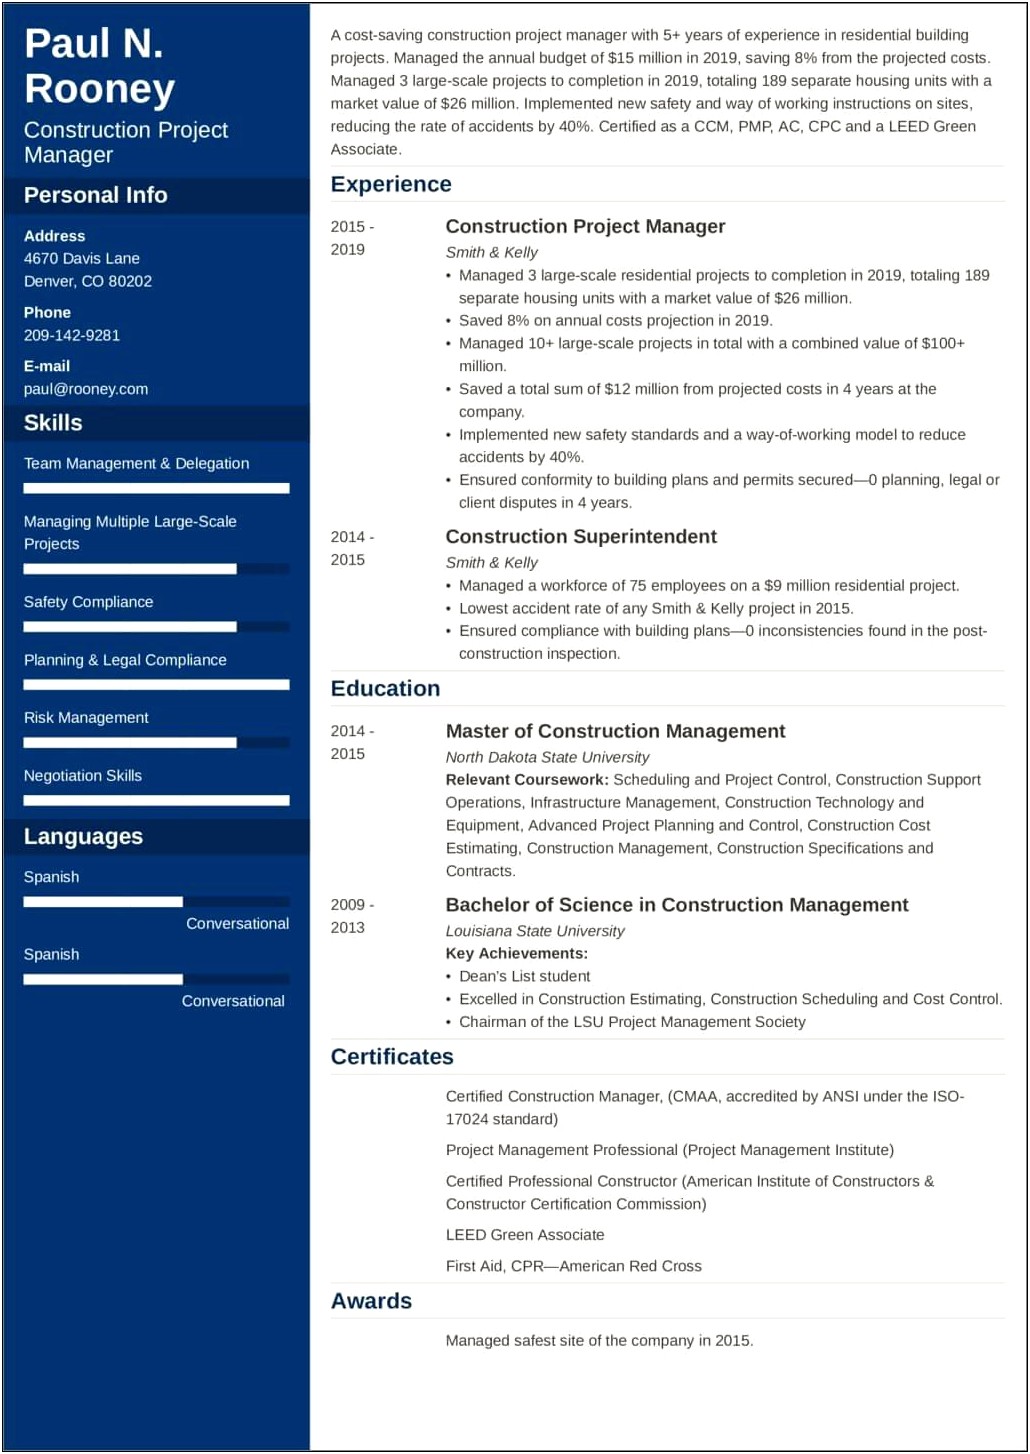 Examples Of Construction Project Management Resumes